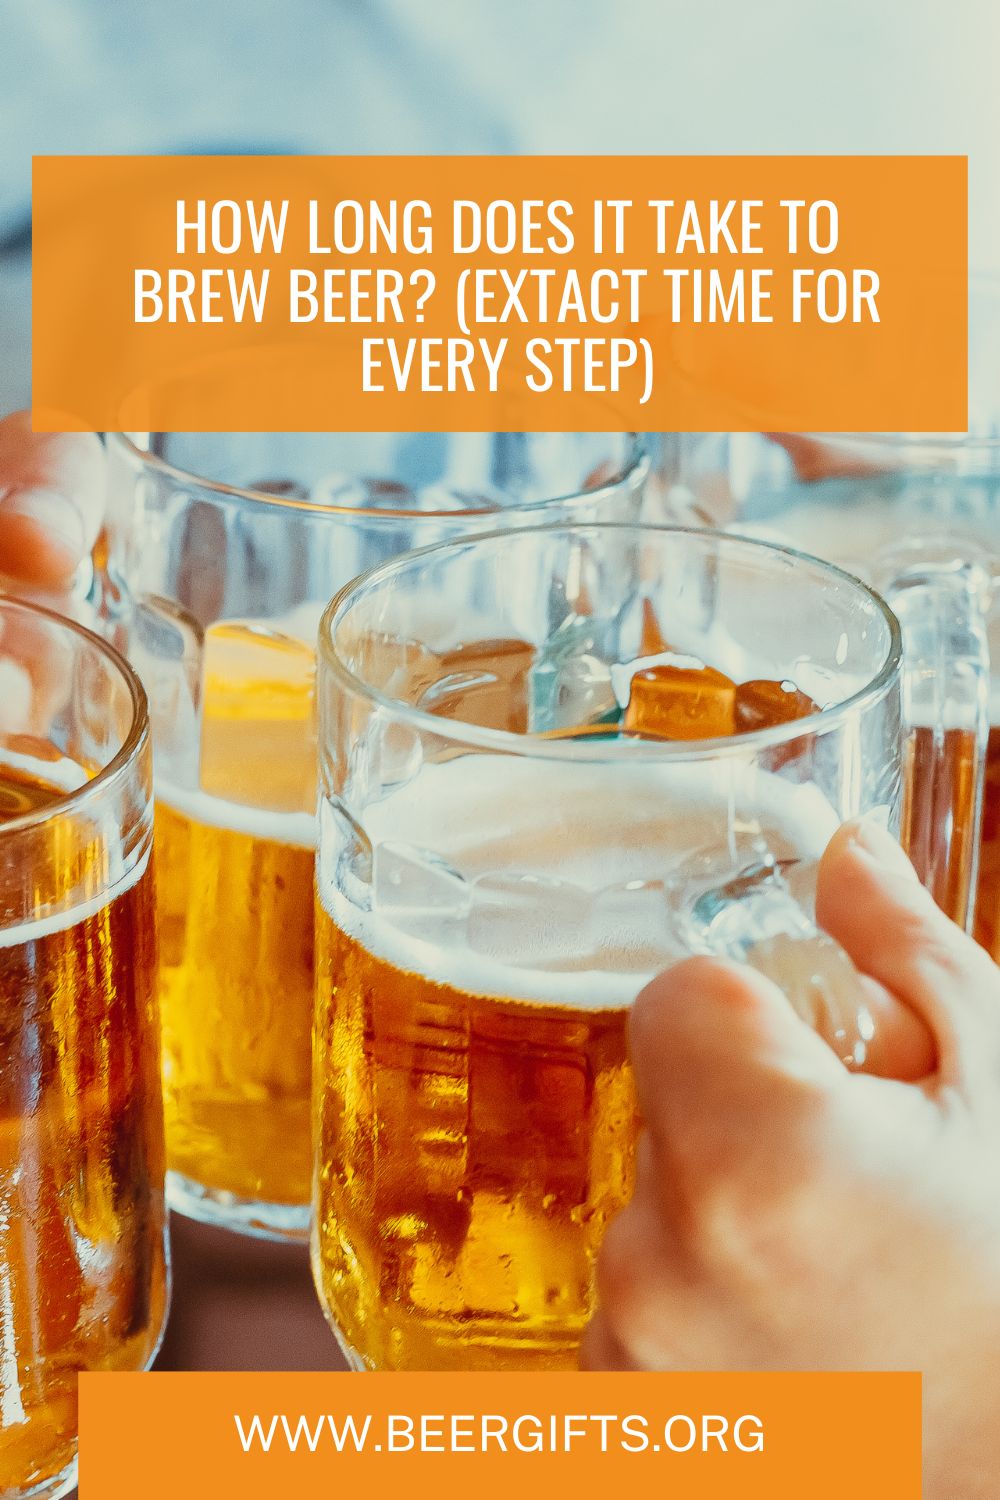 How Long Does It Take to Brew Beer (Extact Time for Every Step)14